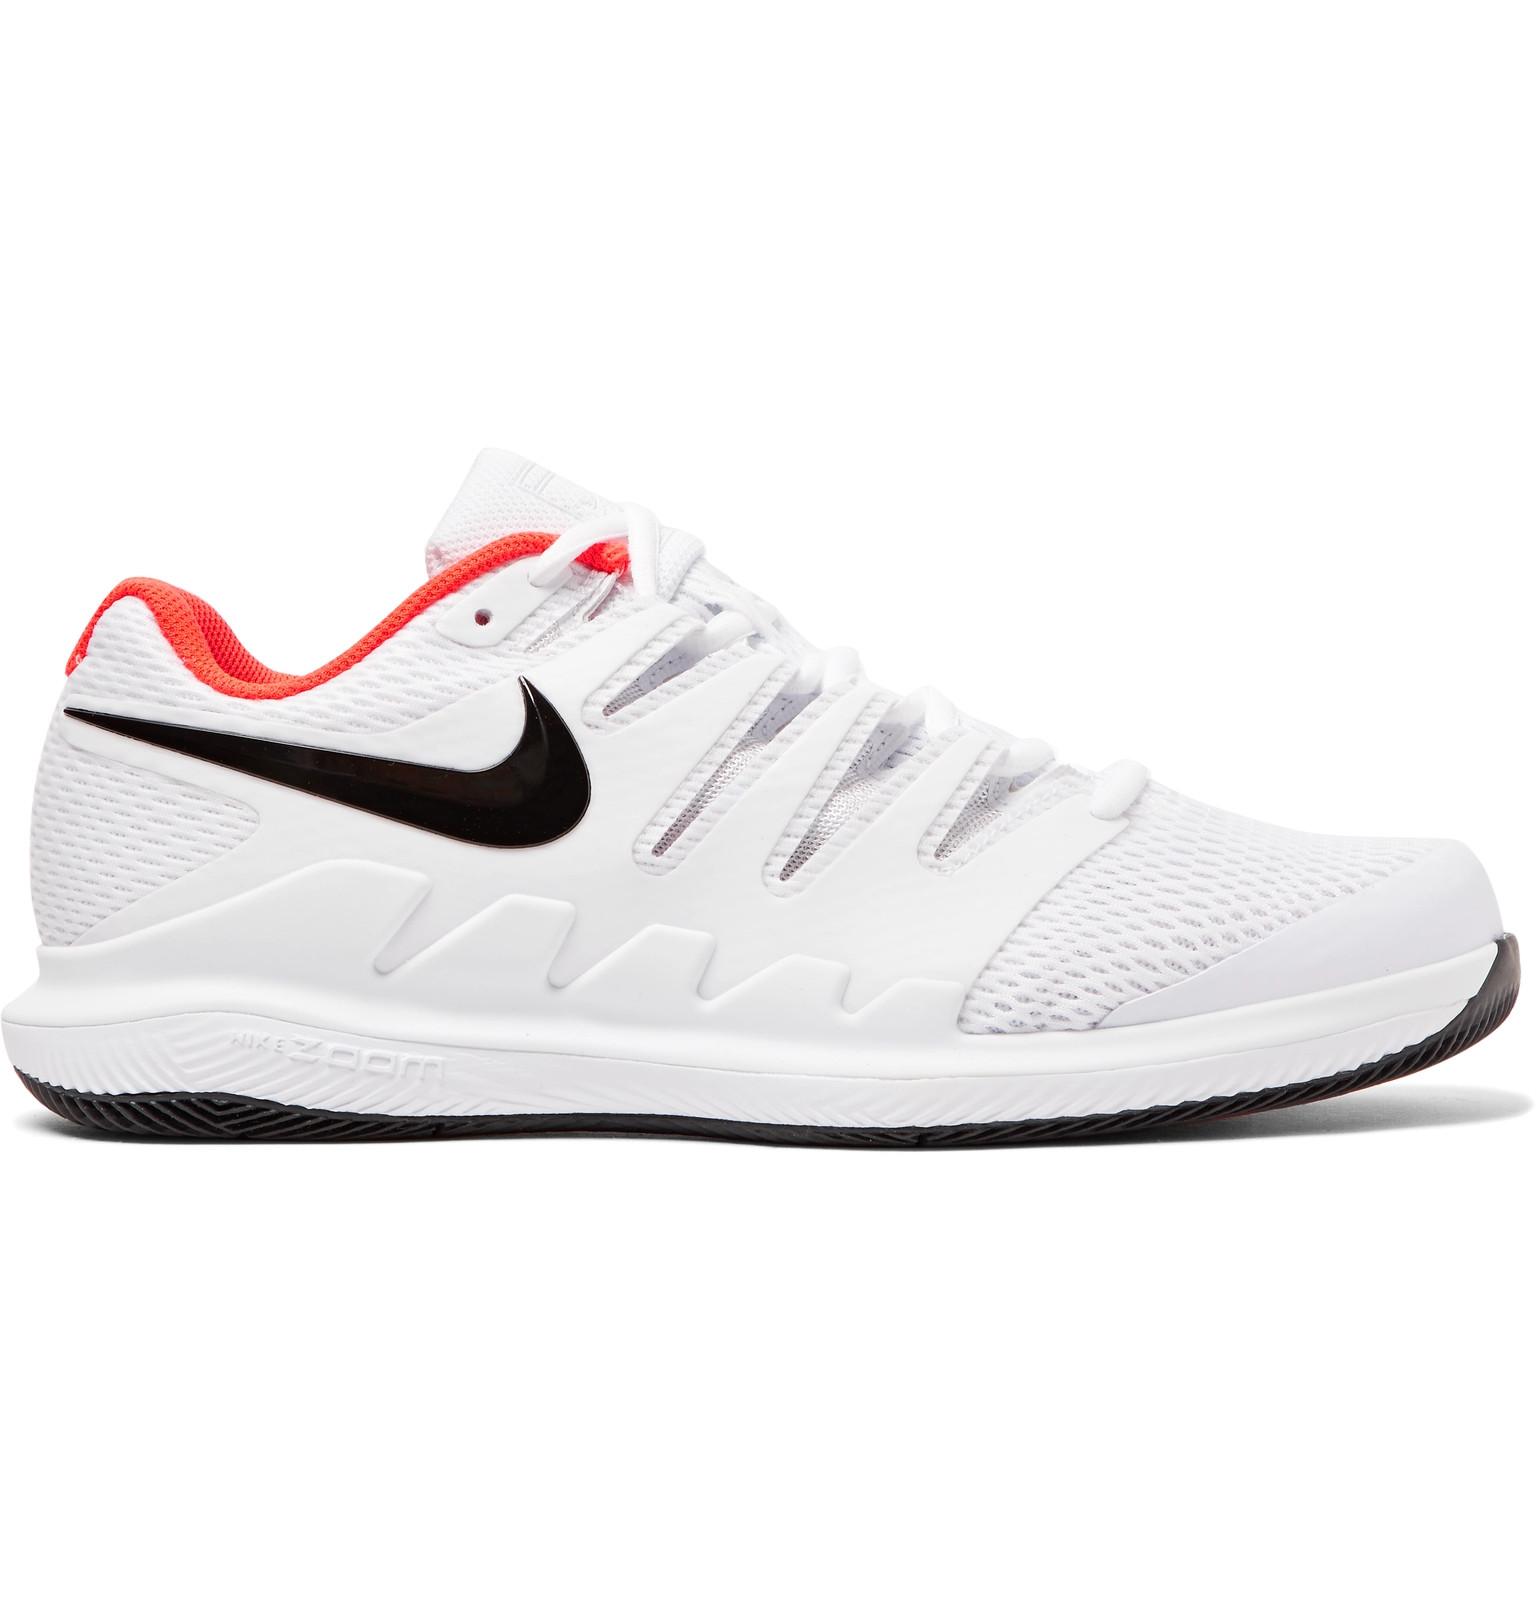 Nike Synthetic Air Zoom Vapor X Tennis Shoes in White/Black/Bright ...